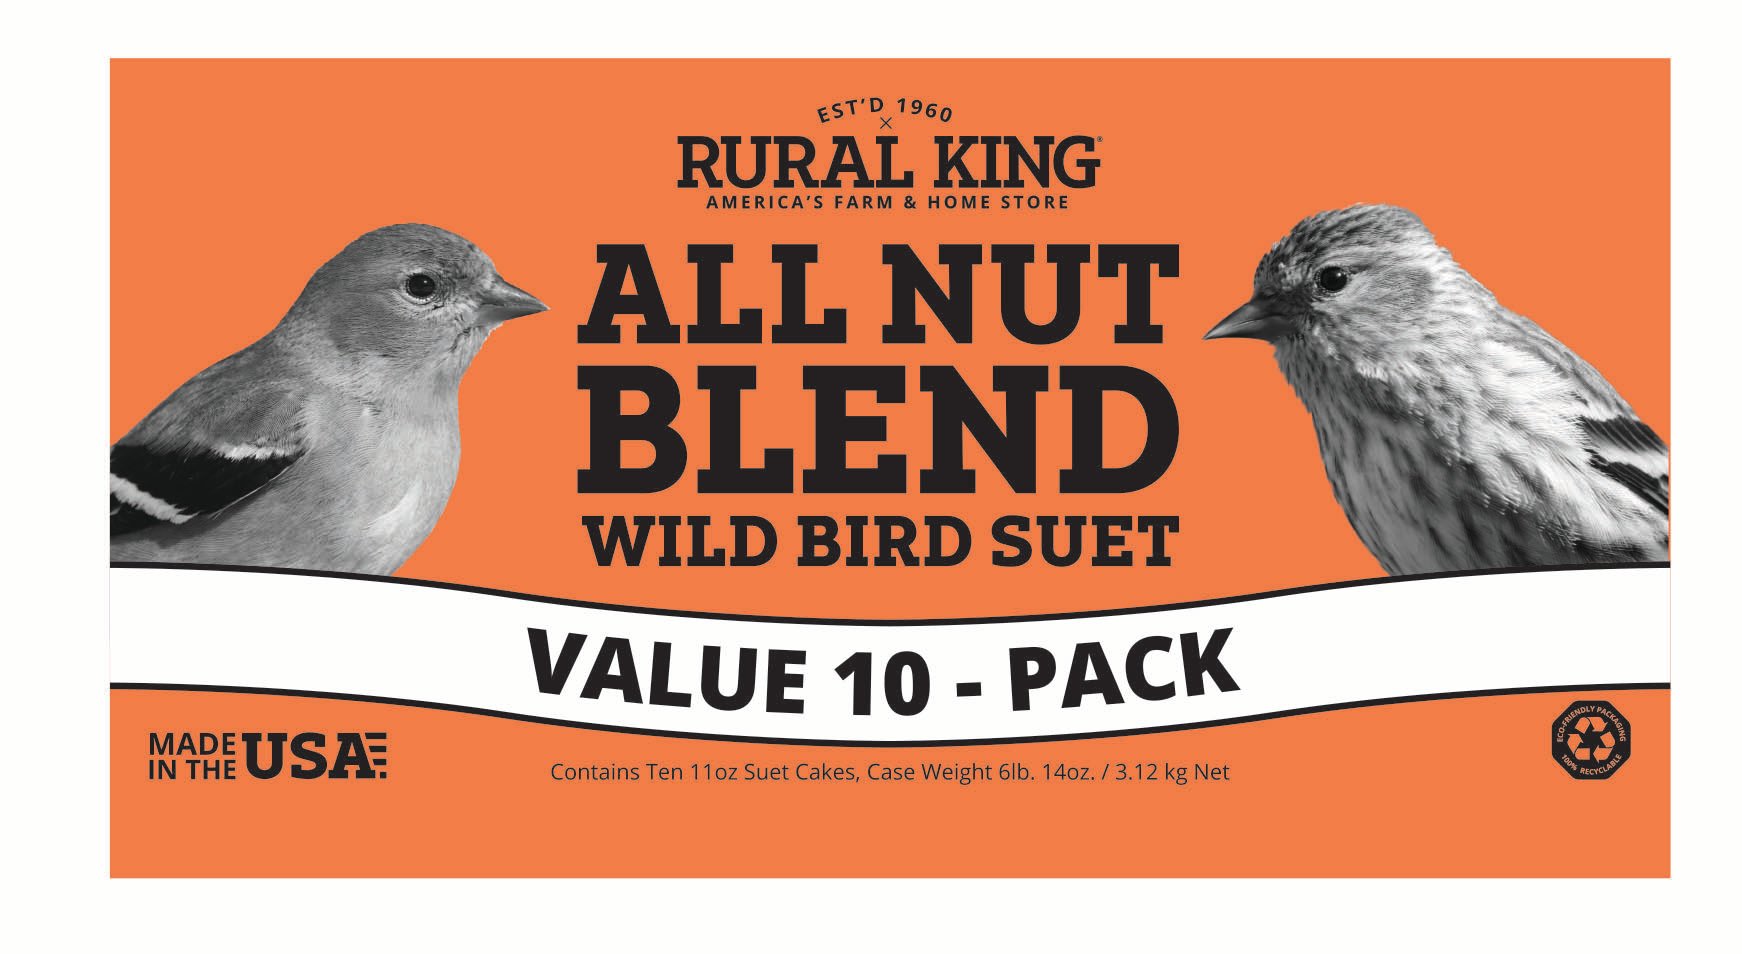 Rural King All Nut Suet, 10 Pack - 350